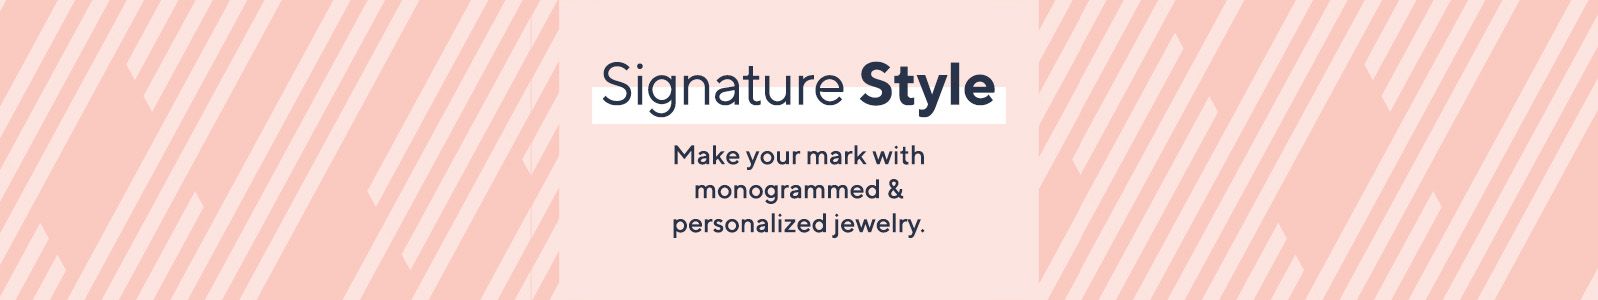 Signature Style. Make your mark with monogrammed & personalized jewelry.